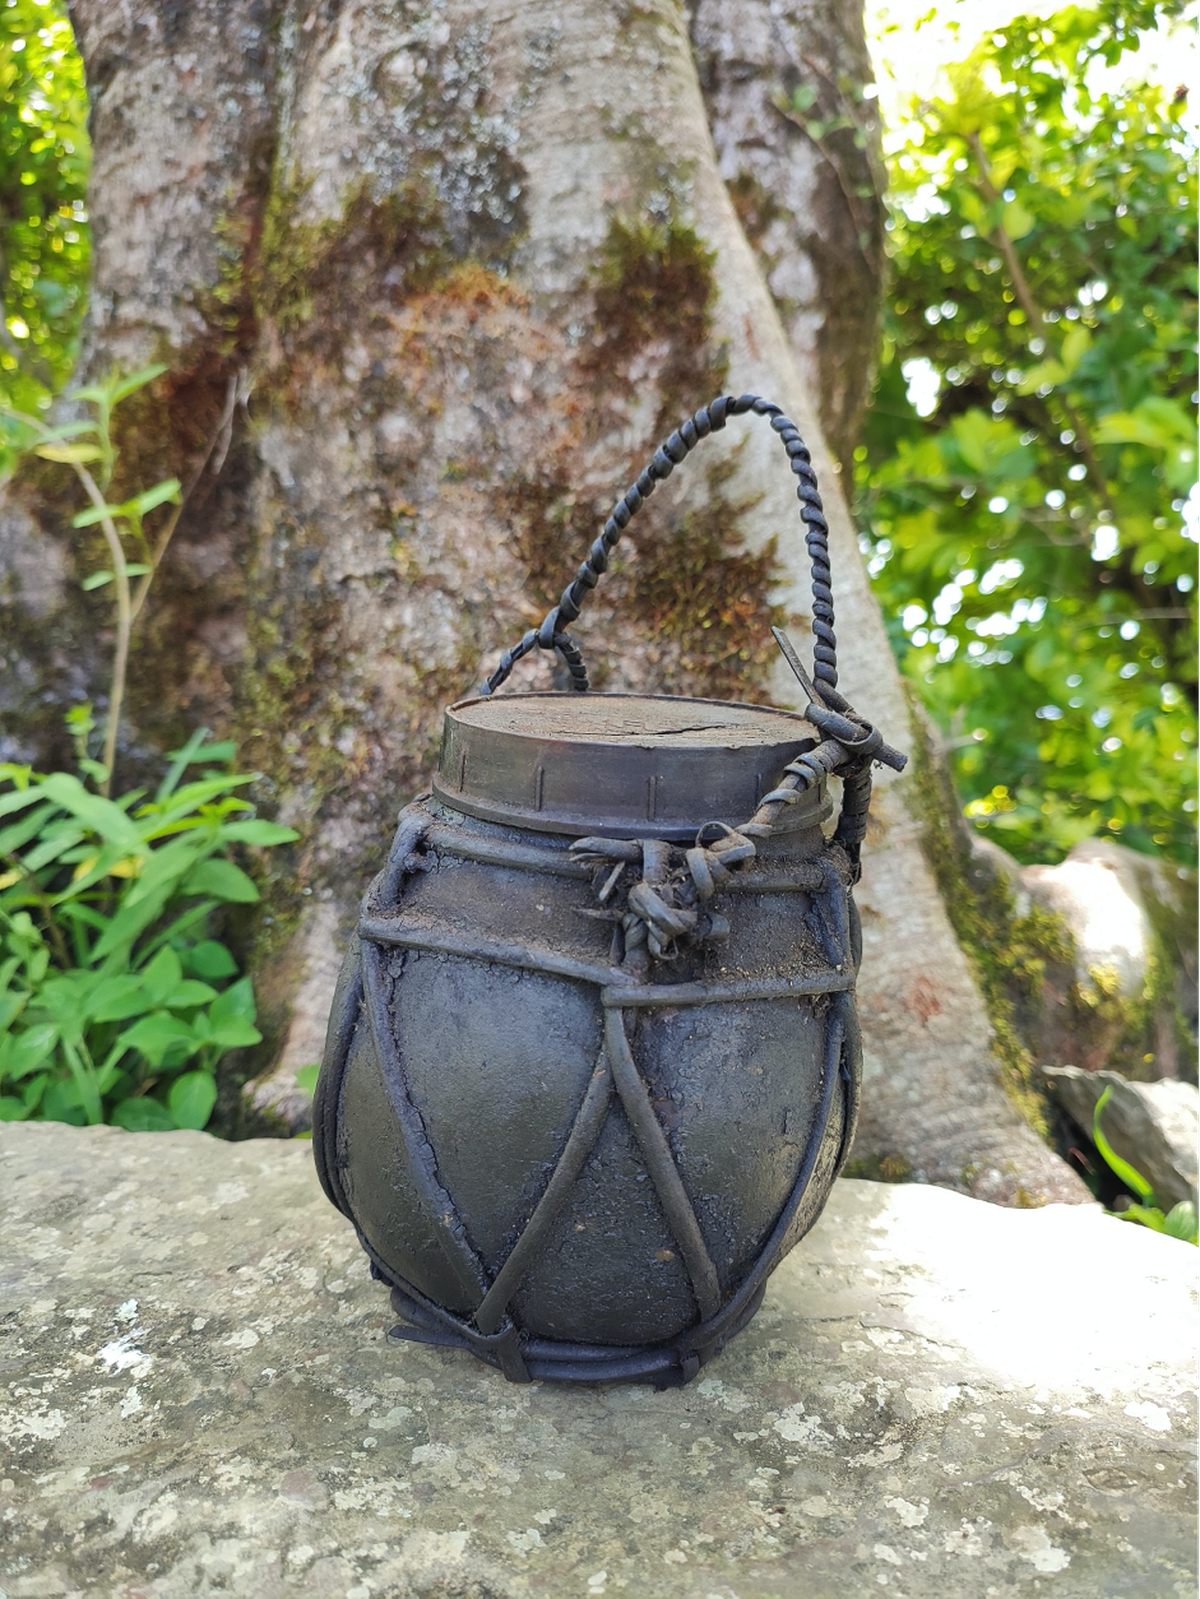 The traditional ganaeng tamdui kou (container for mustard leaves chutney)